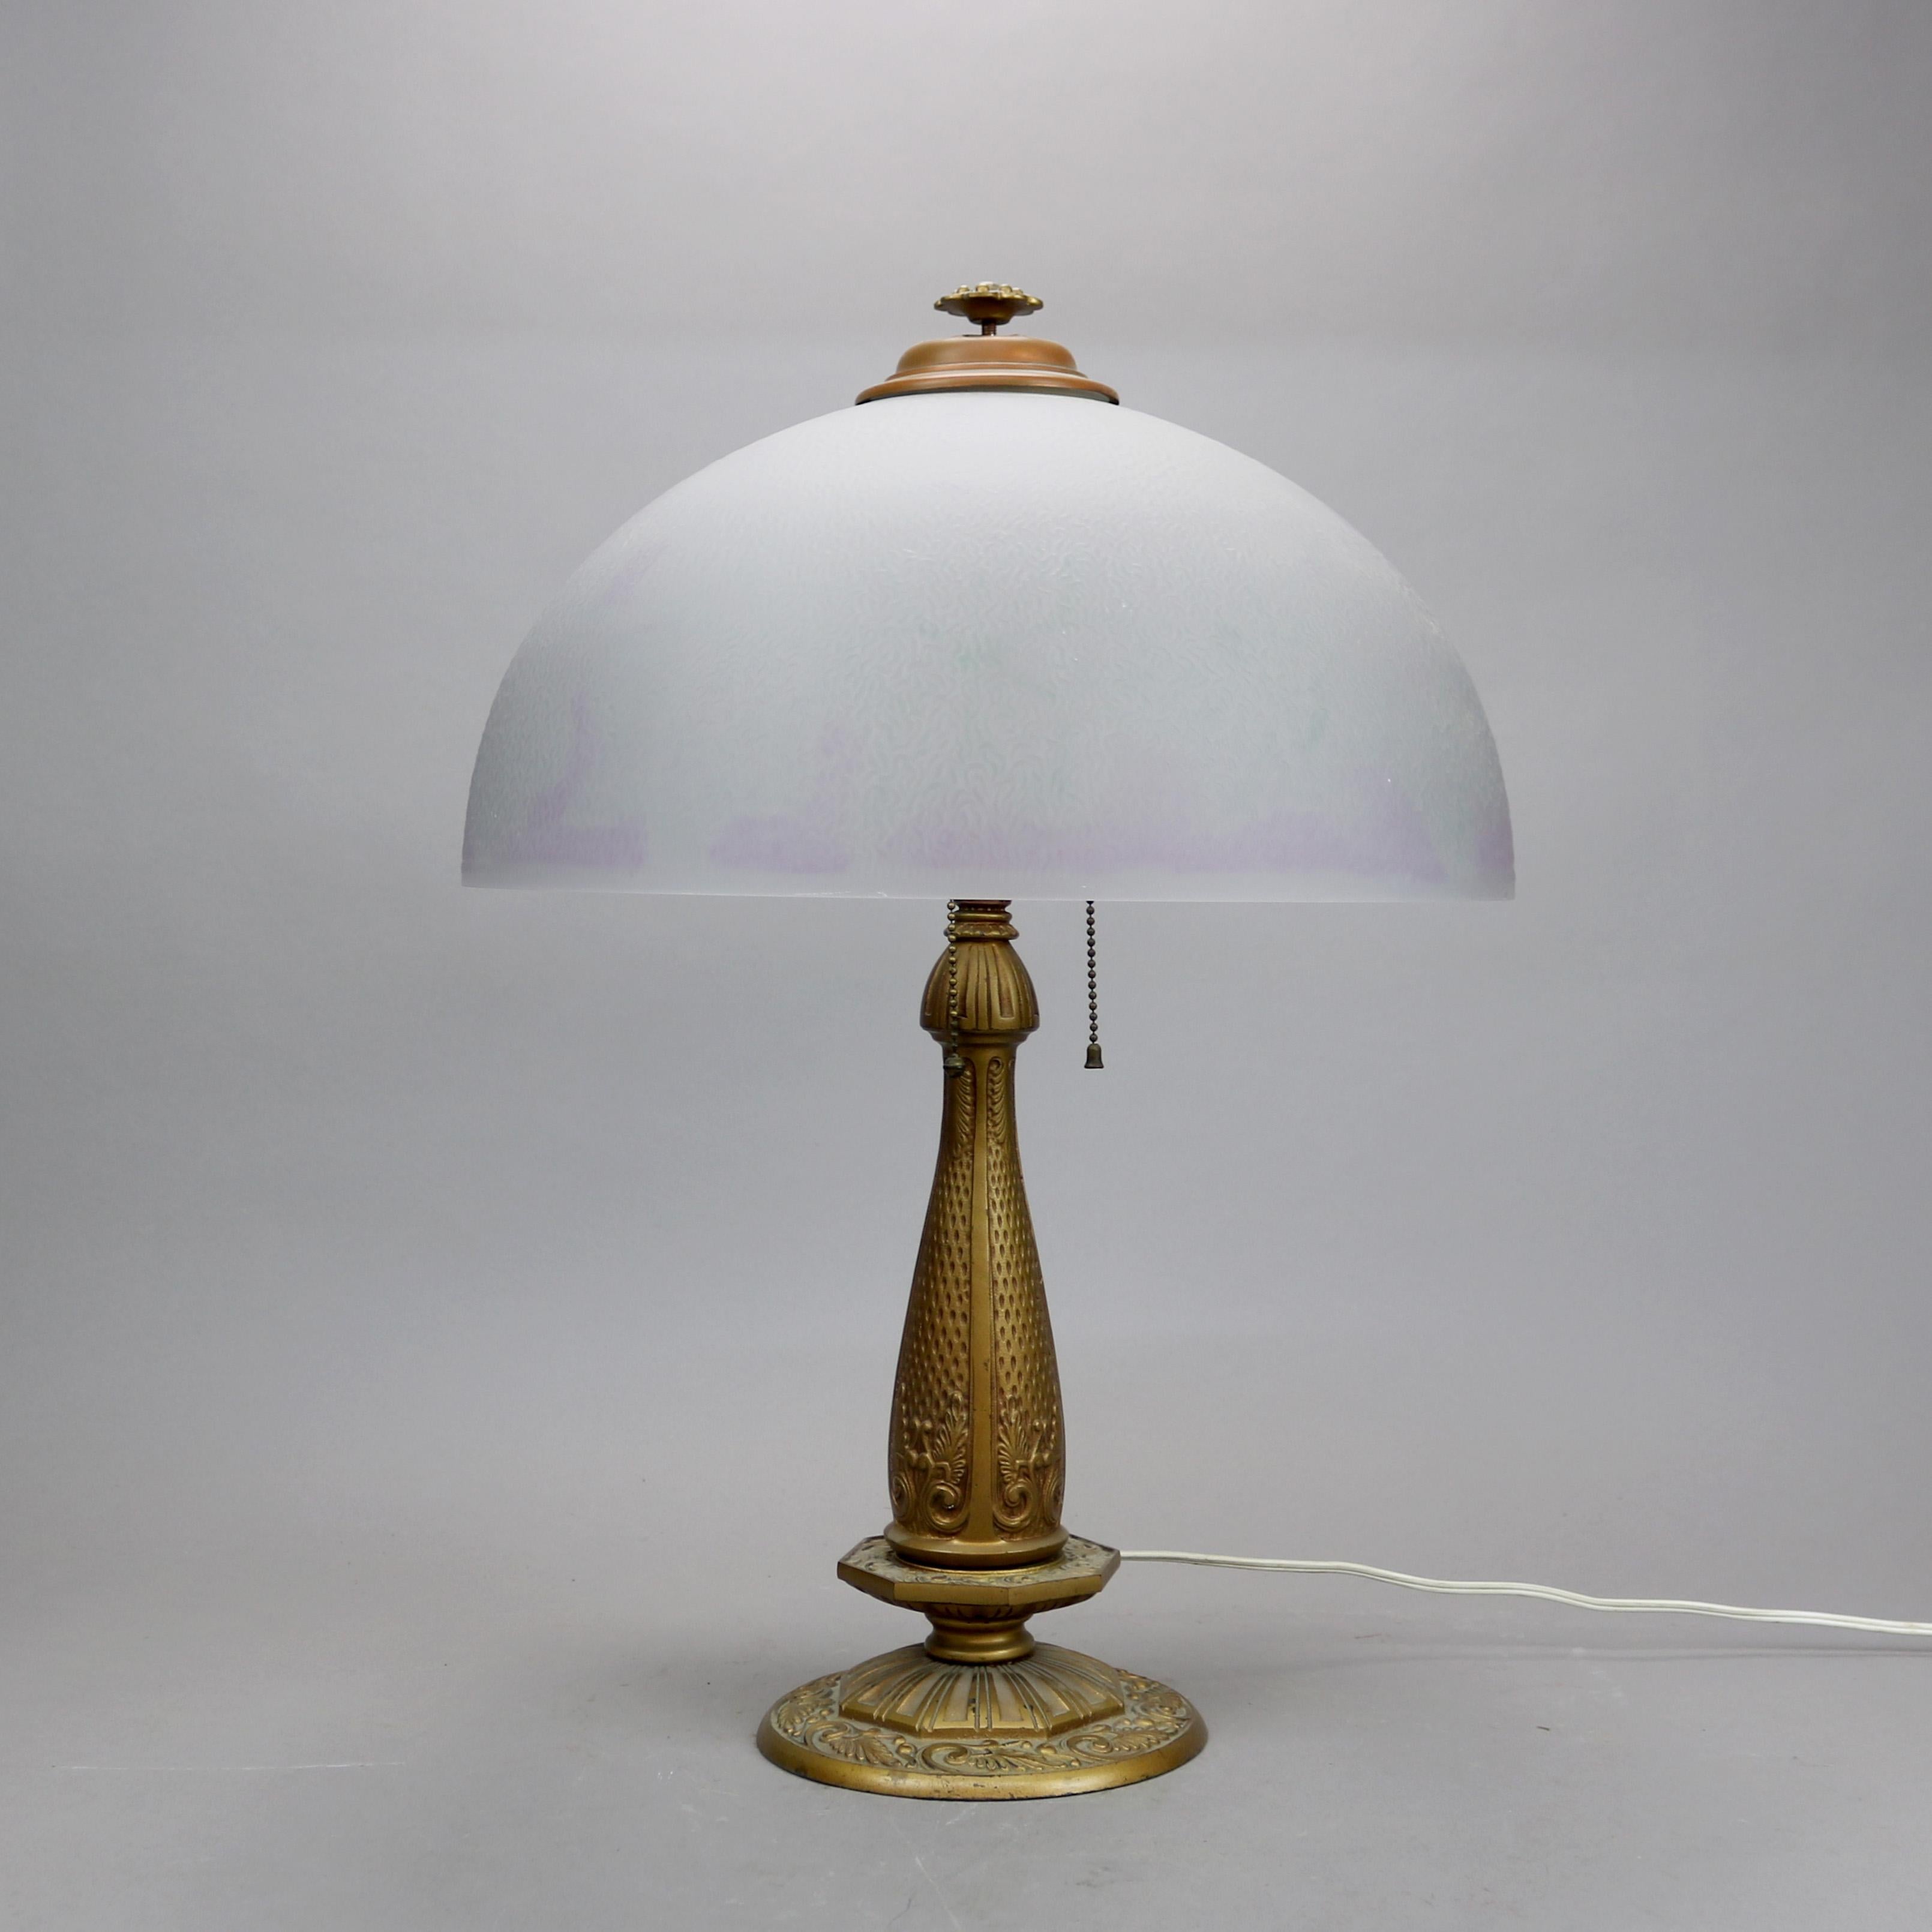 An antique Arts & Crafts table lamp in the manner of Pittsburg Lamp Co. offers chipped ice glass dome shade over double socket cast base in the stylized floral form, embossed 1909 on base as photographed, c1920

Measures - 22.5''H X 16''W X 16''D.